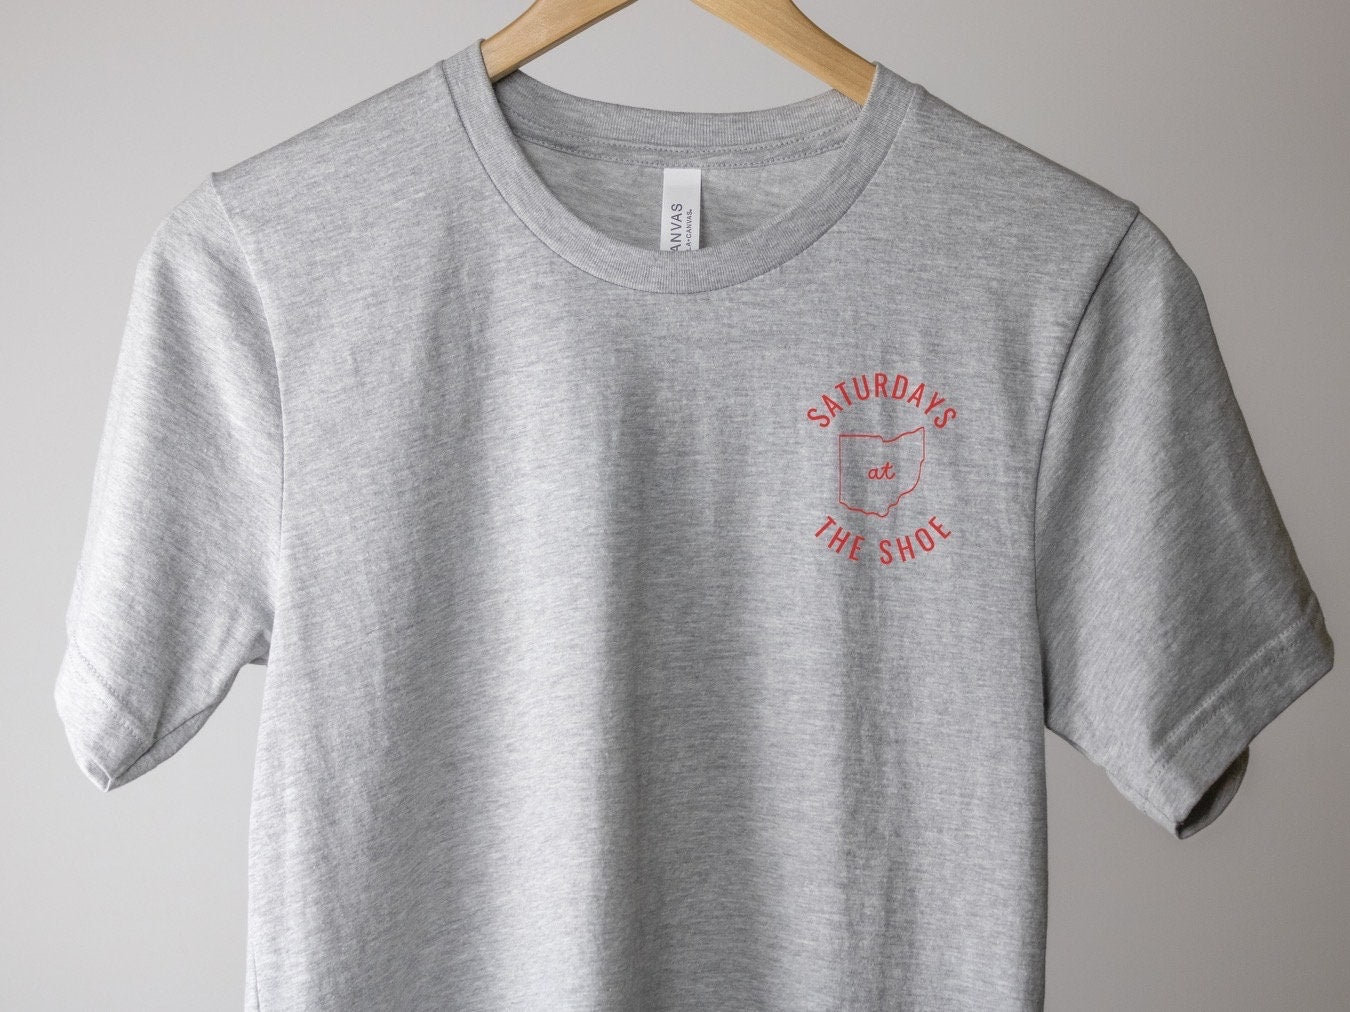 Ohio State Saturdays at The Shoe: Trendy Unisex t Shirt for Adults - Buckeye Love, Game Day Apparel - Ohio state fanwear - OSU Buckeyes